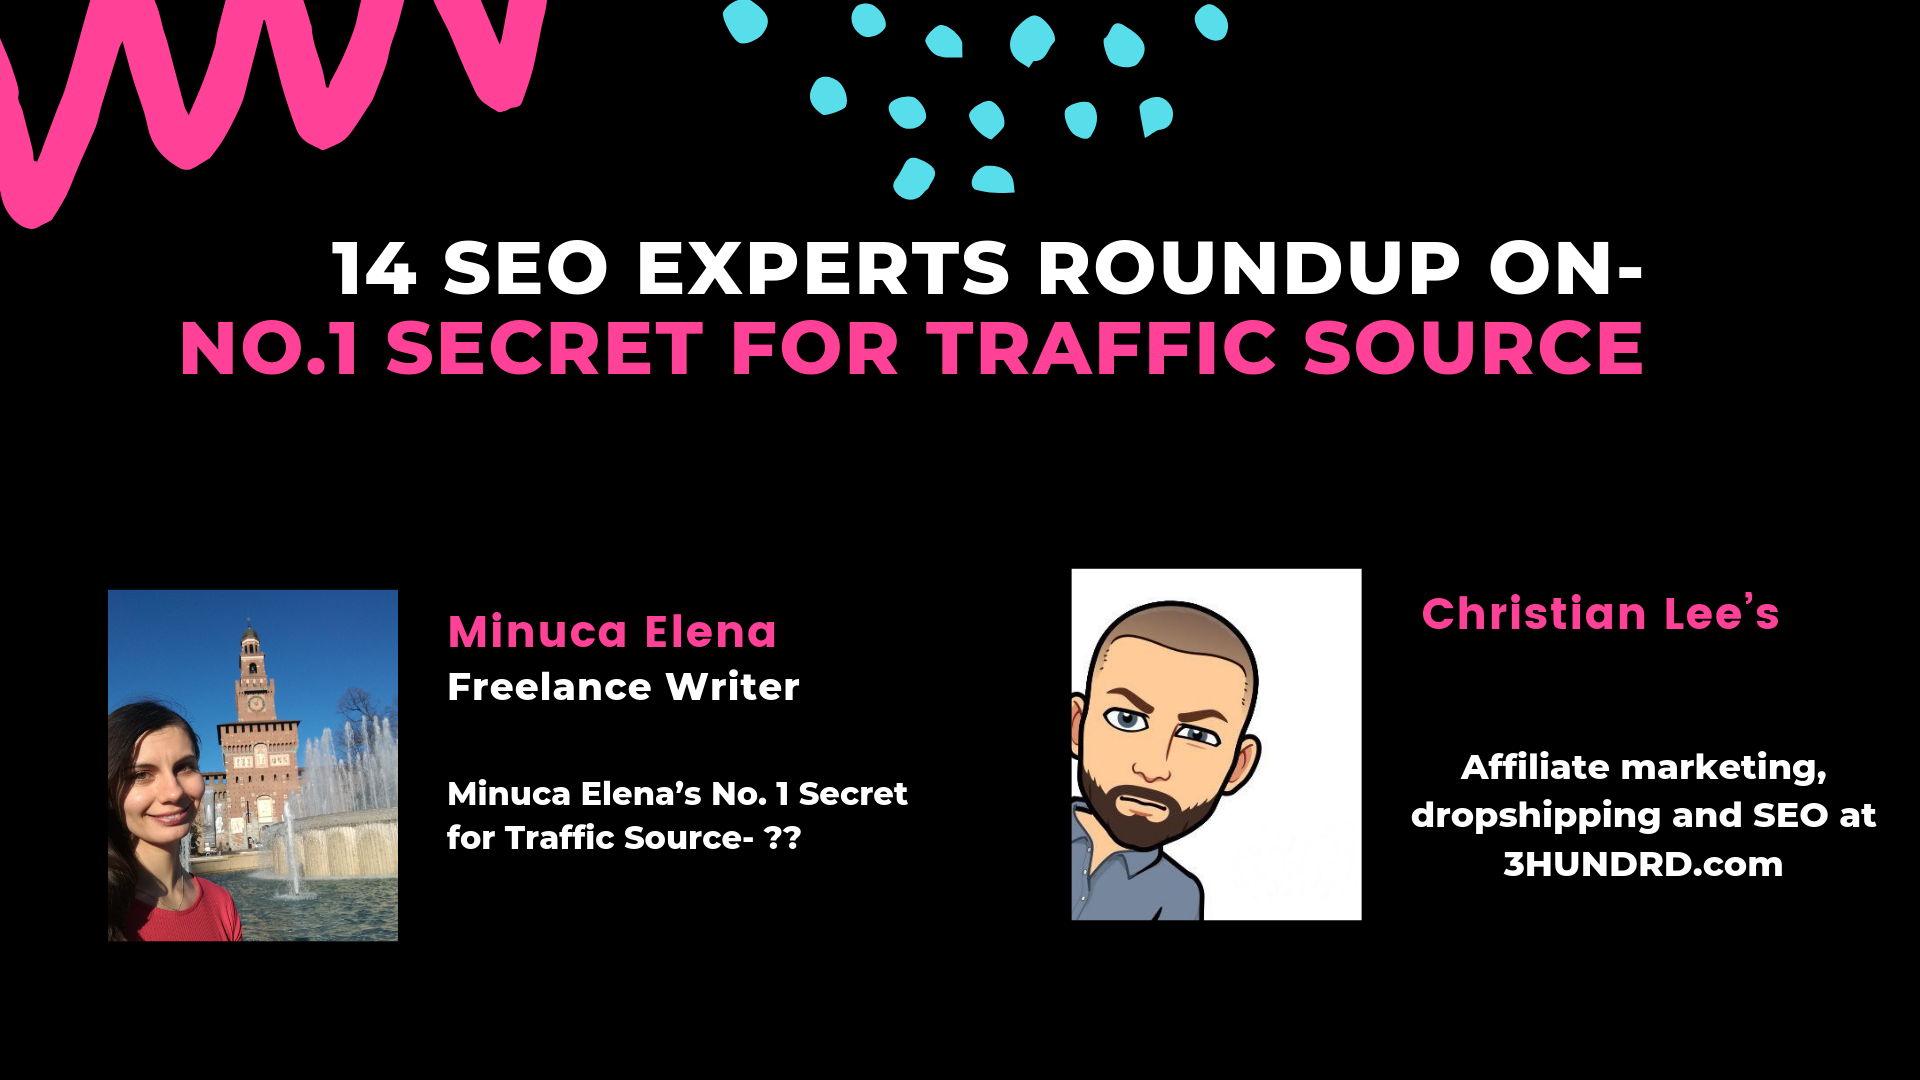 14 SEO Experts Roundup On- No.1 Secret For Traffic Source For 2022